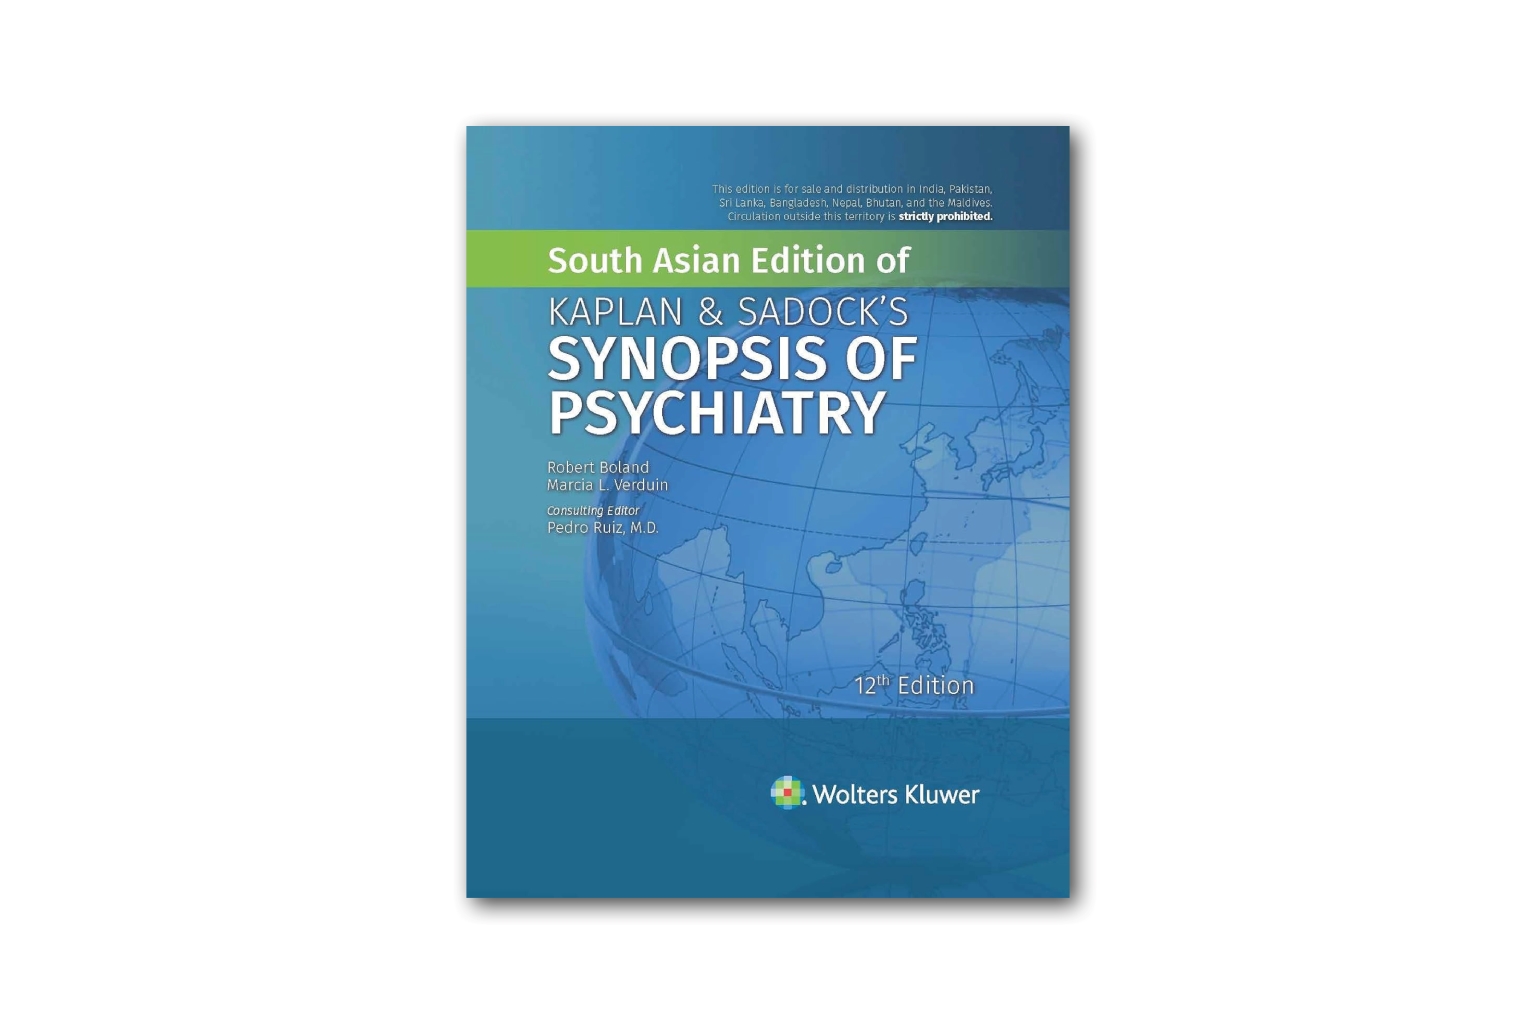 South Asian Edition of Kaplan& Sadock's Synopsis of Psychiatry